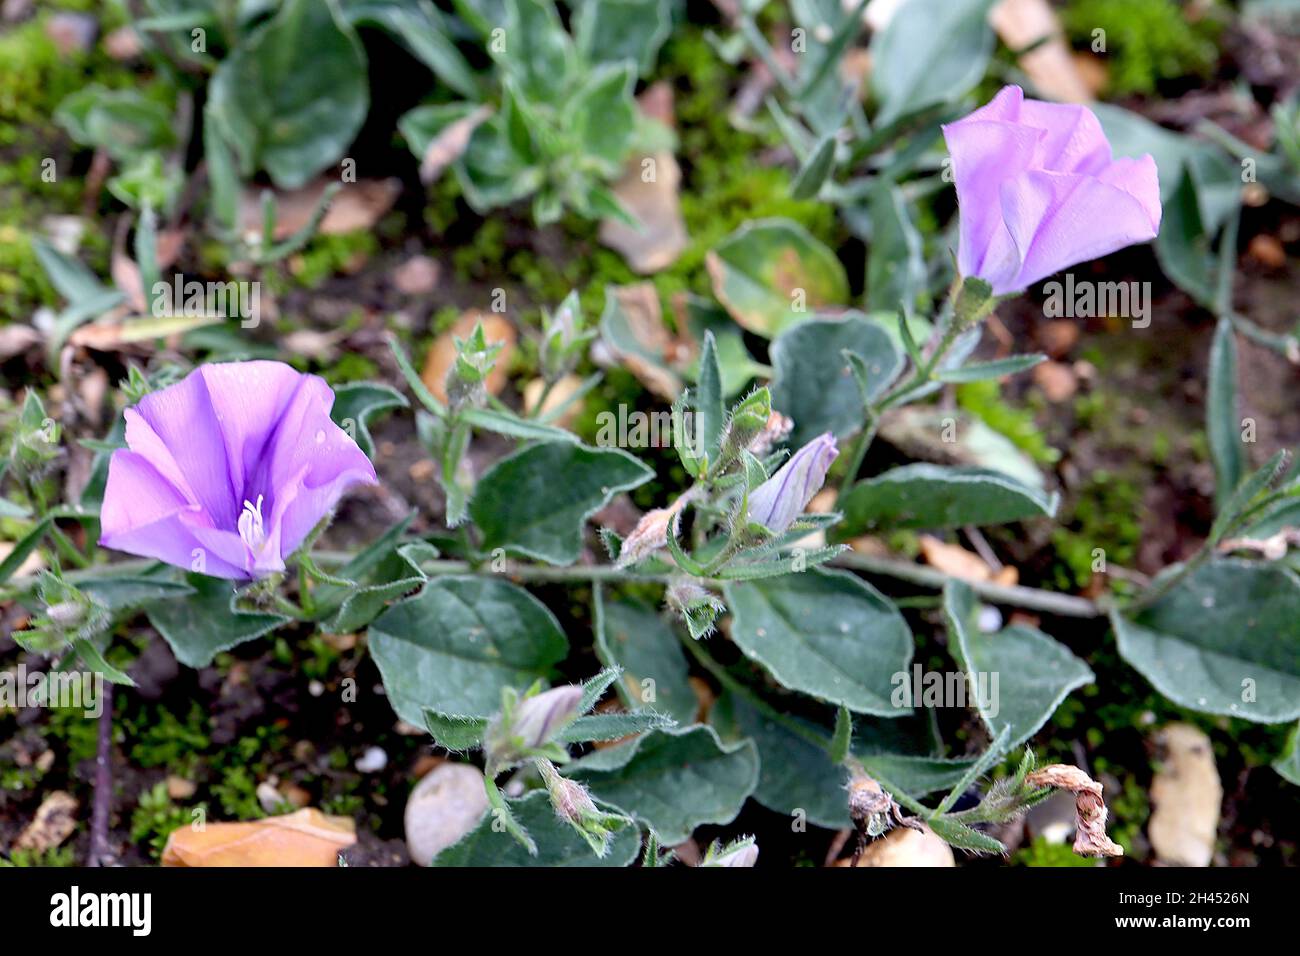 Convolvulus sabatius blue rock bindweed – violet blue funnel-shaped flowers and dark grey green ovate leaves on trailing stems,  October, England, UK Stock Photo